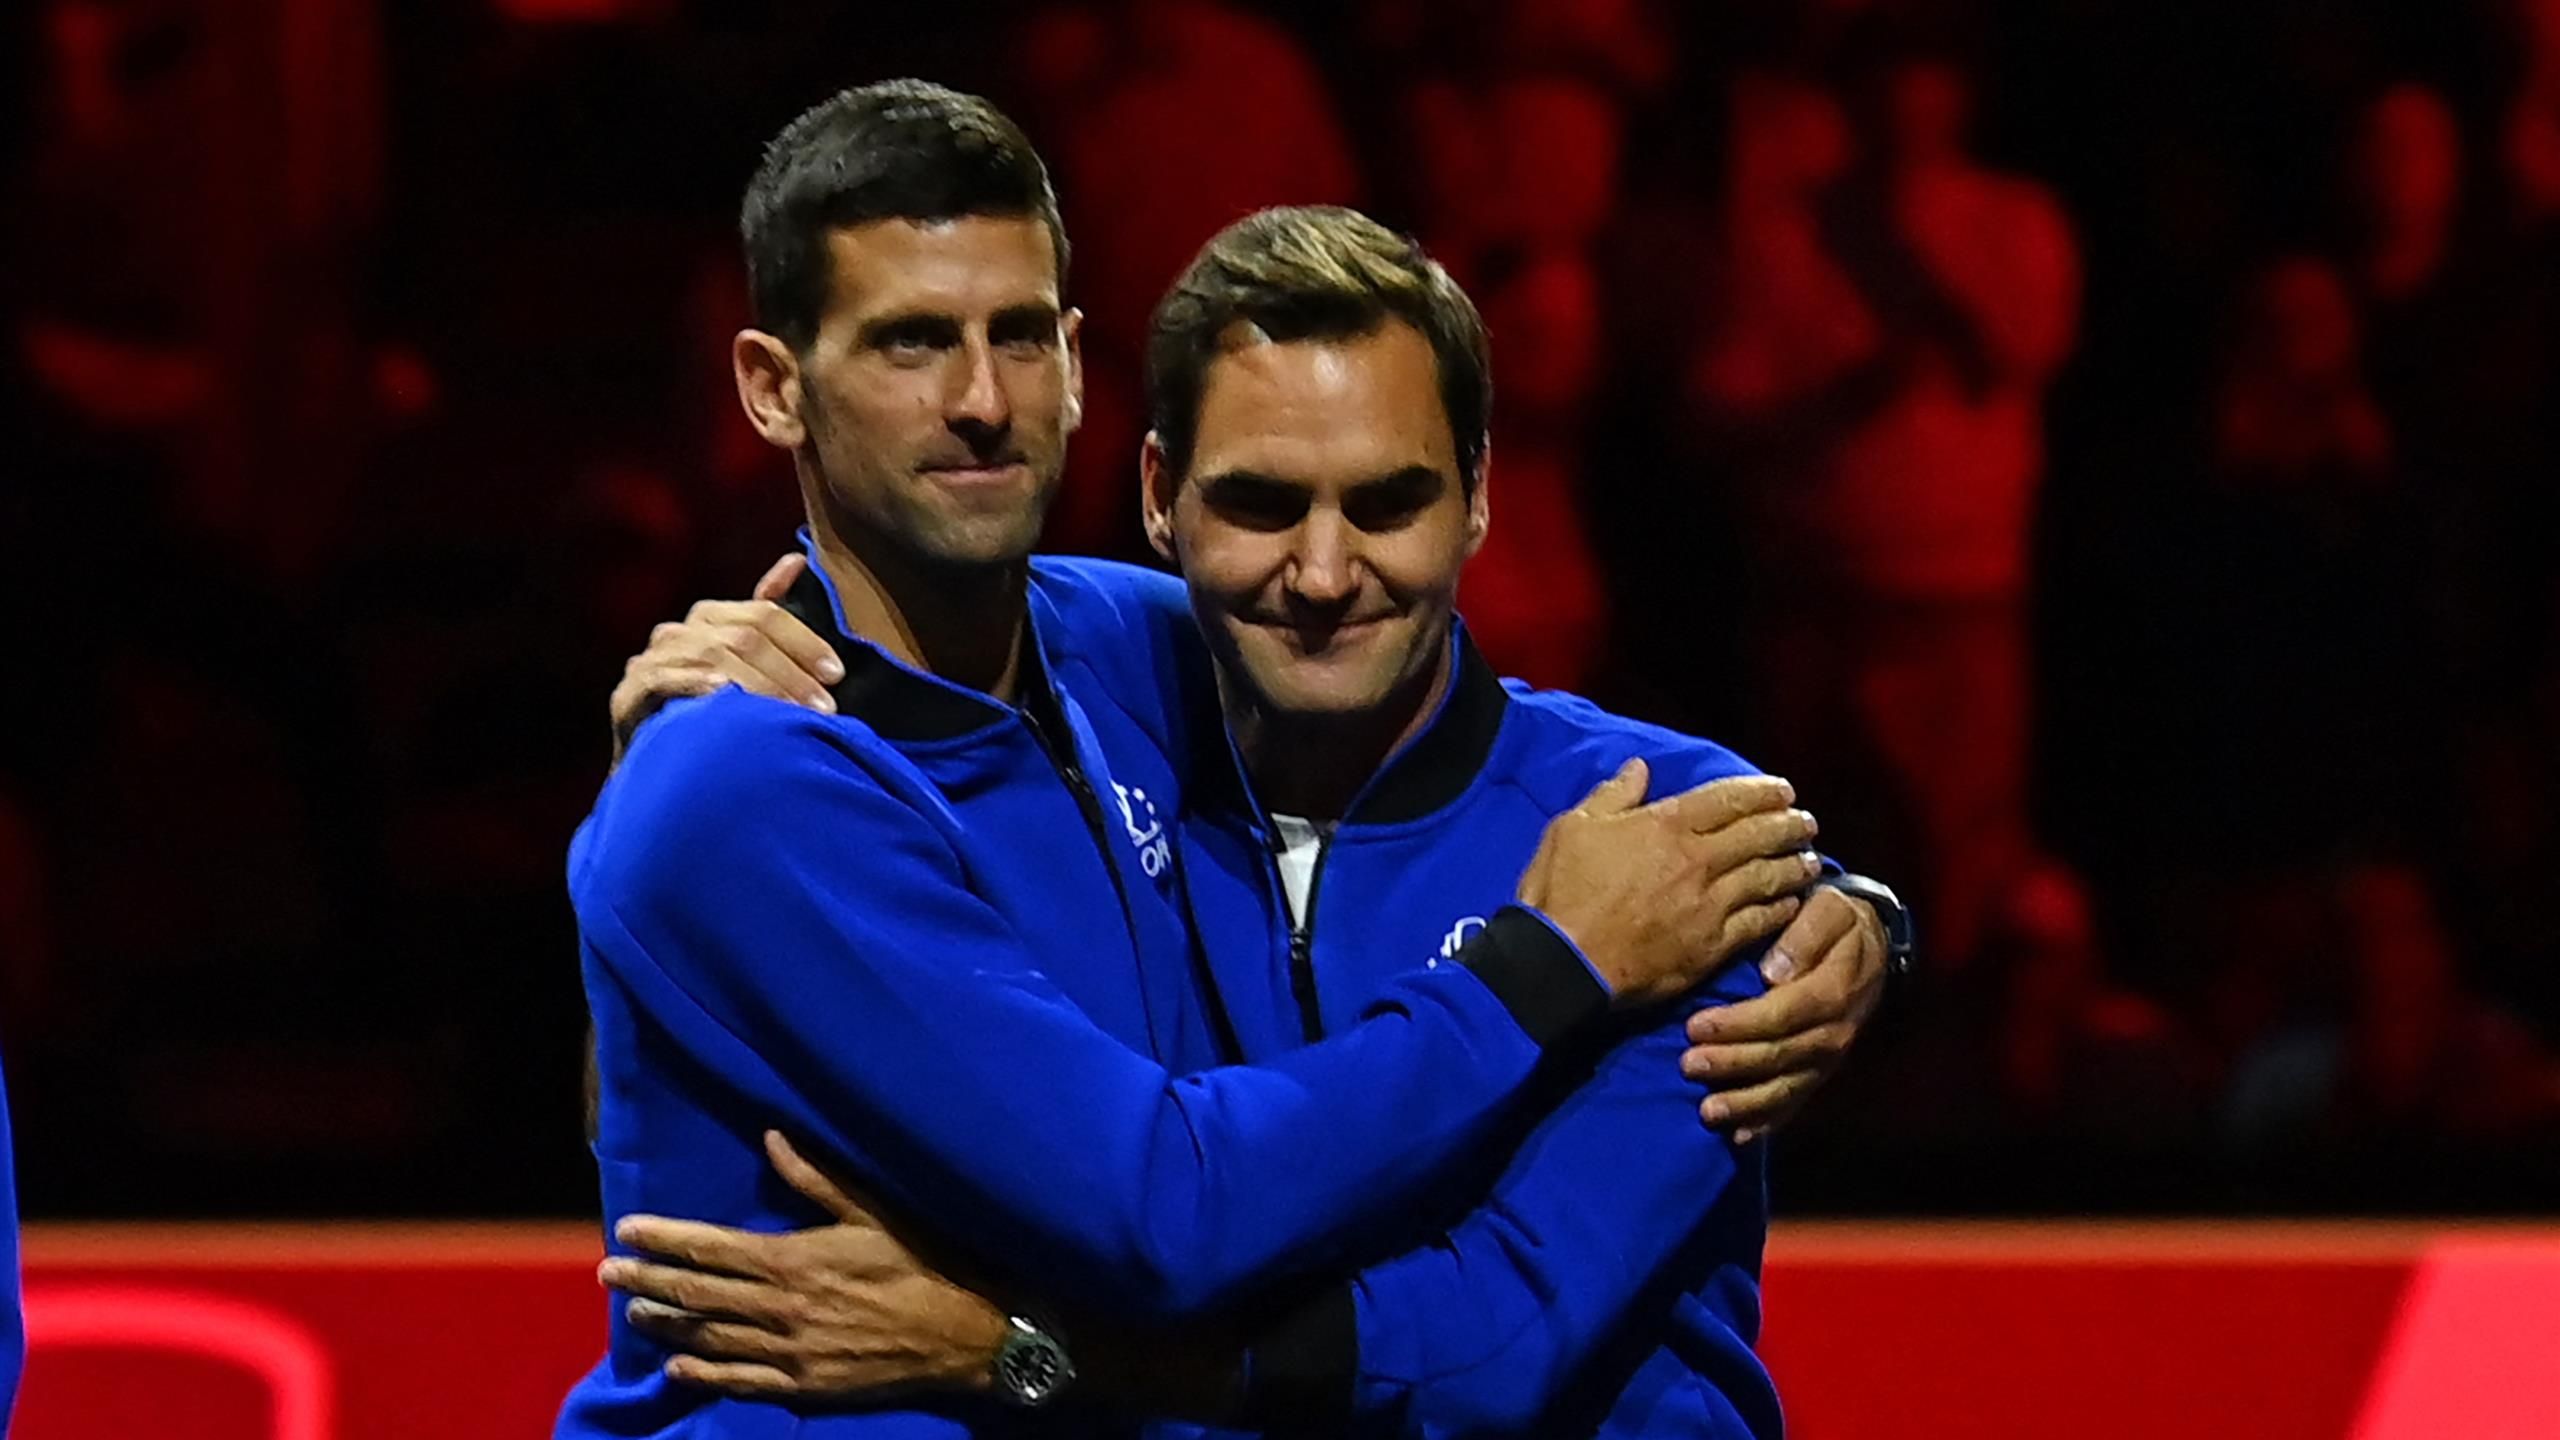 Amazing comeback - Roger Federer heaps praise on Team World after they seal first Laver Cup win